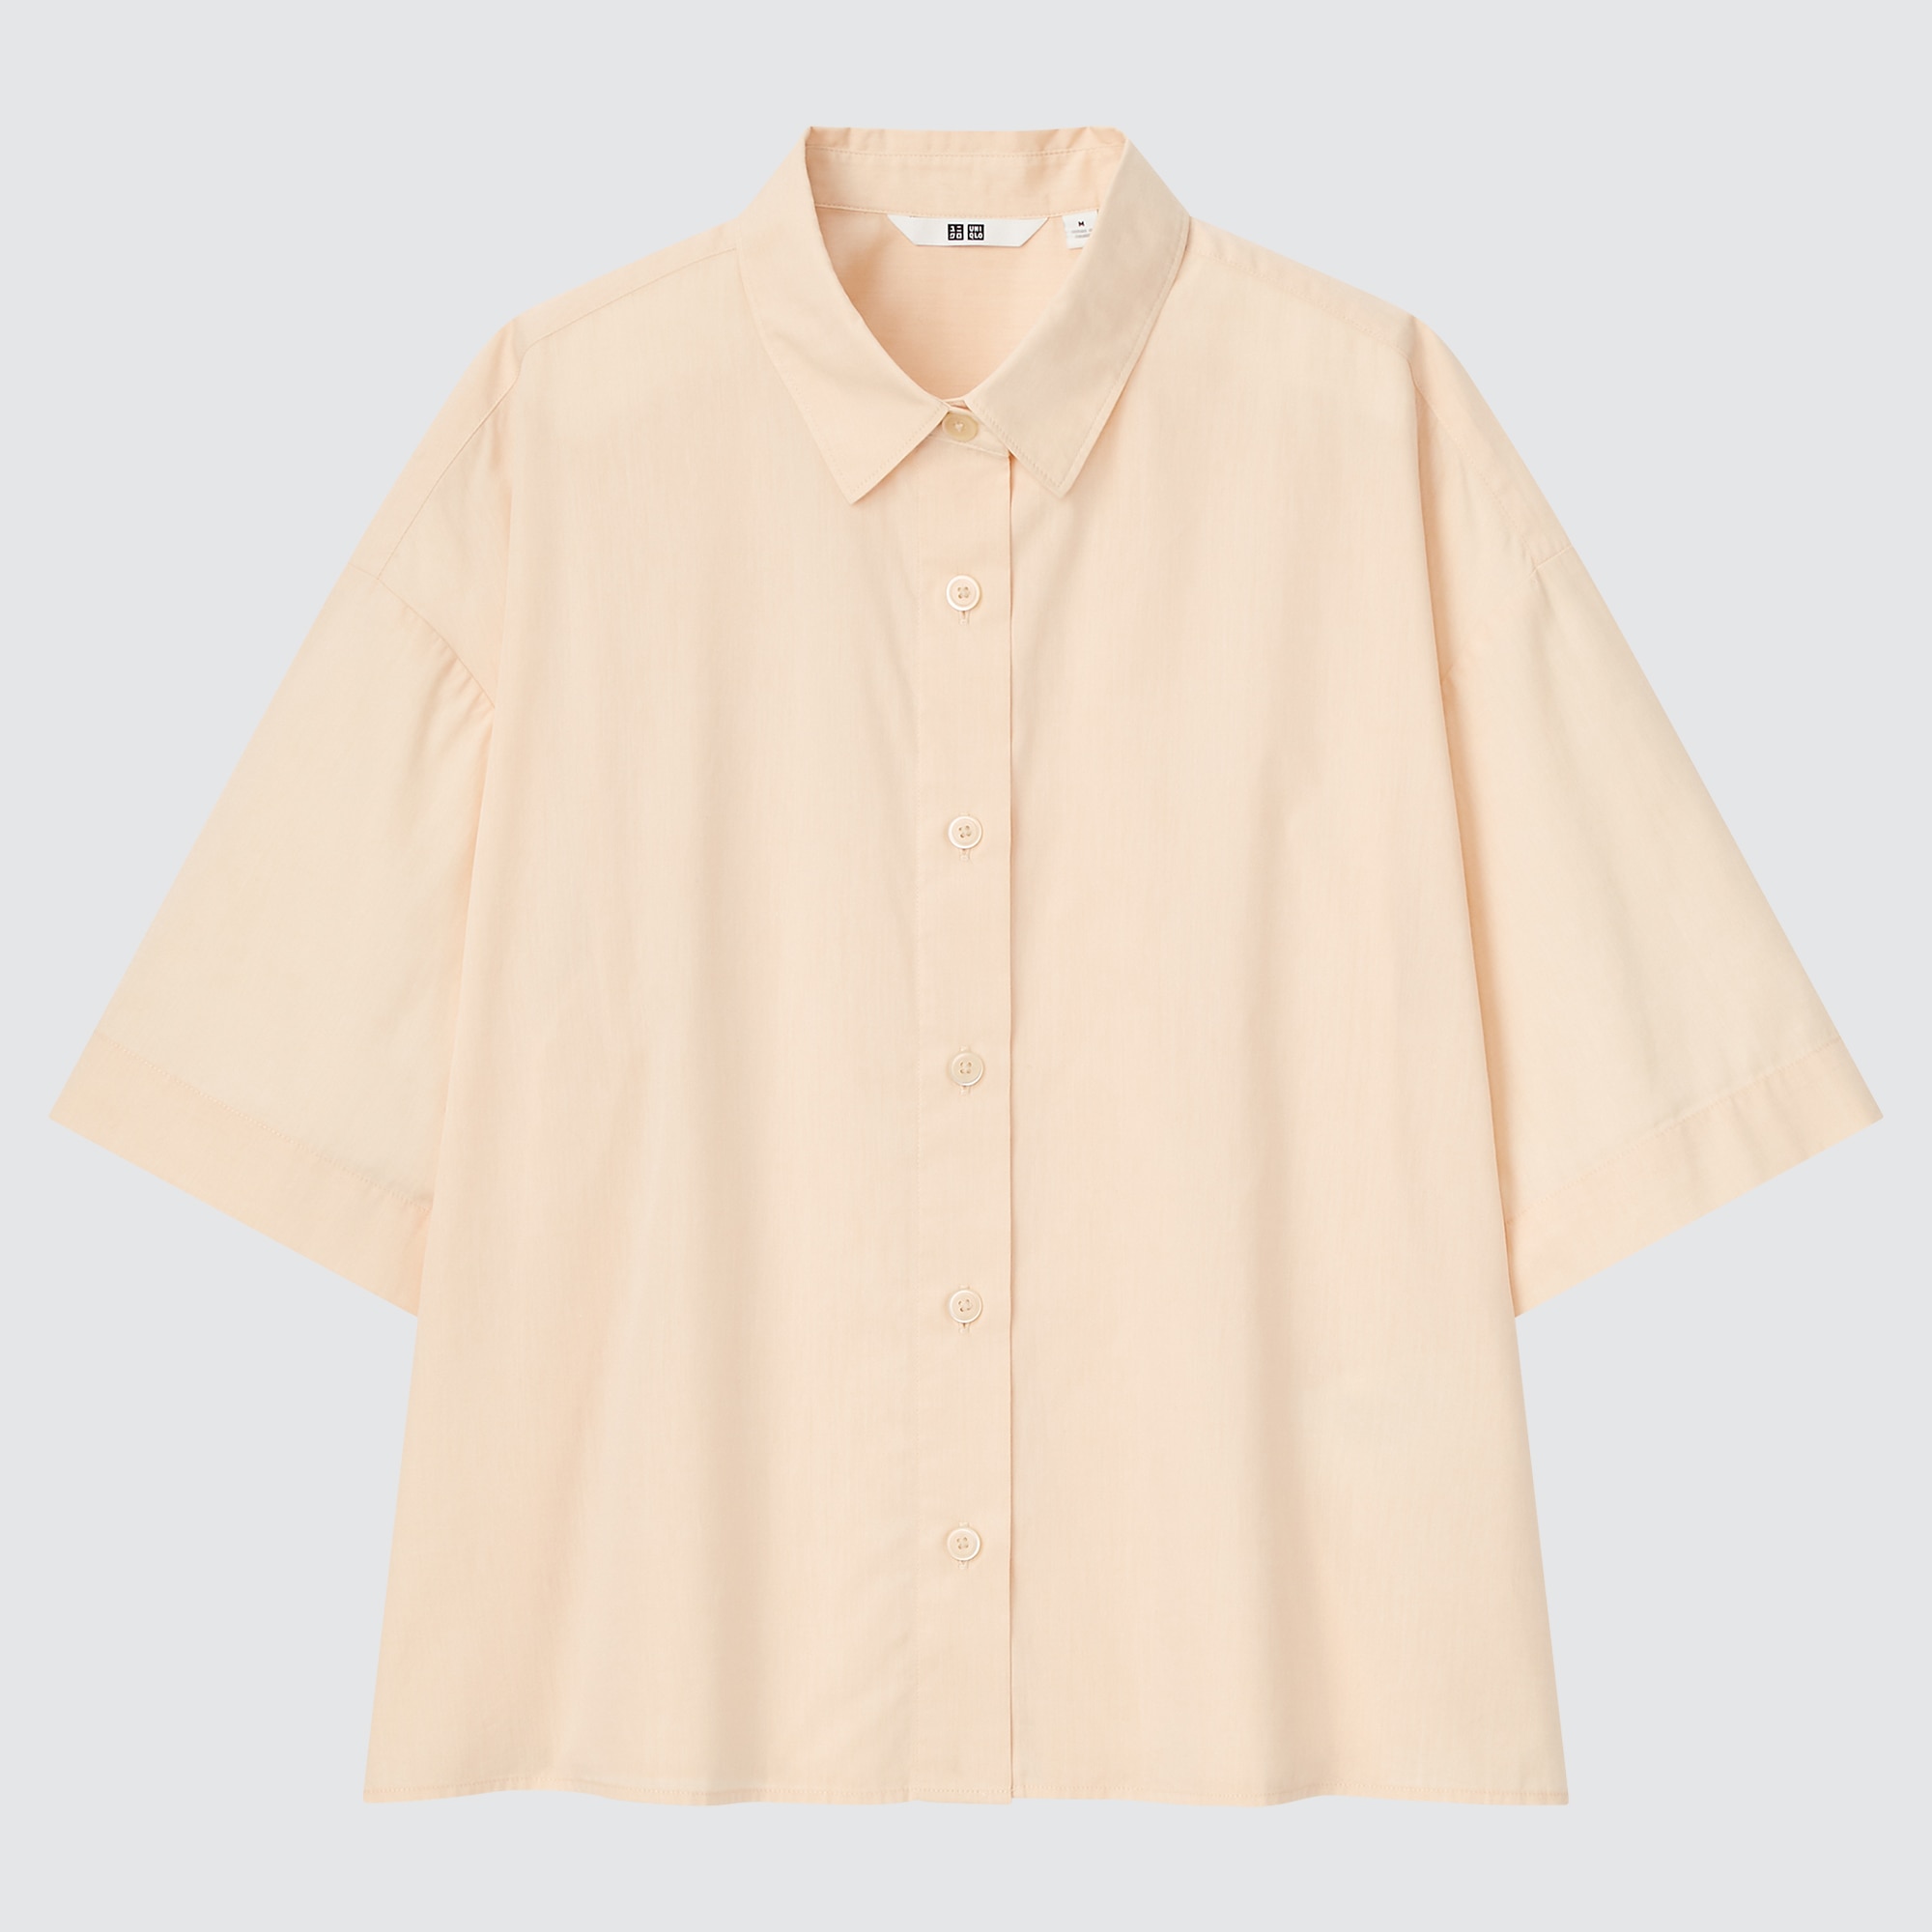 Check styling ideas for「COTTON HALF SLEEVE SHIRT、COTTON RELACO 3